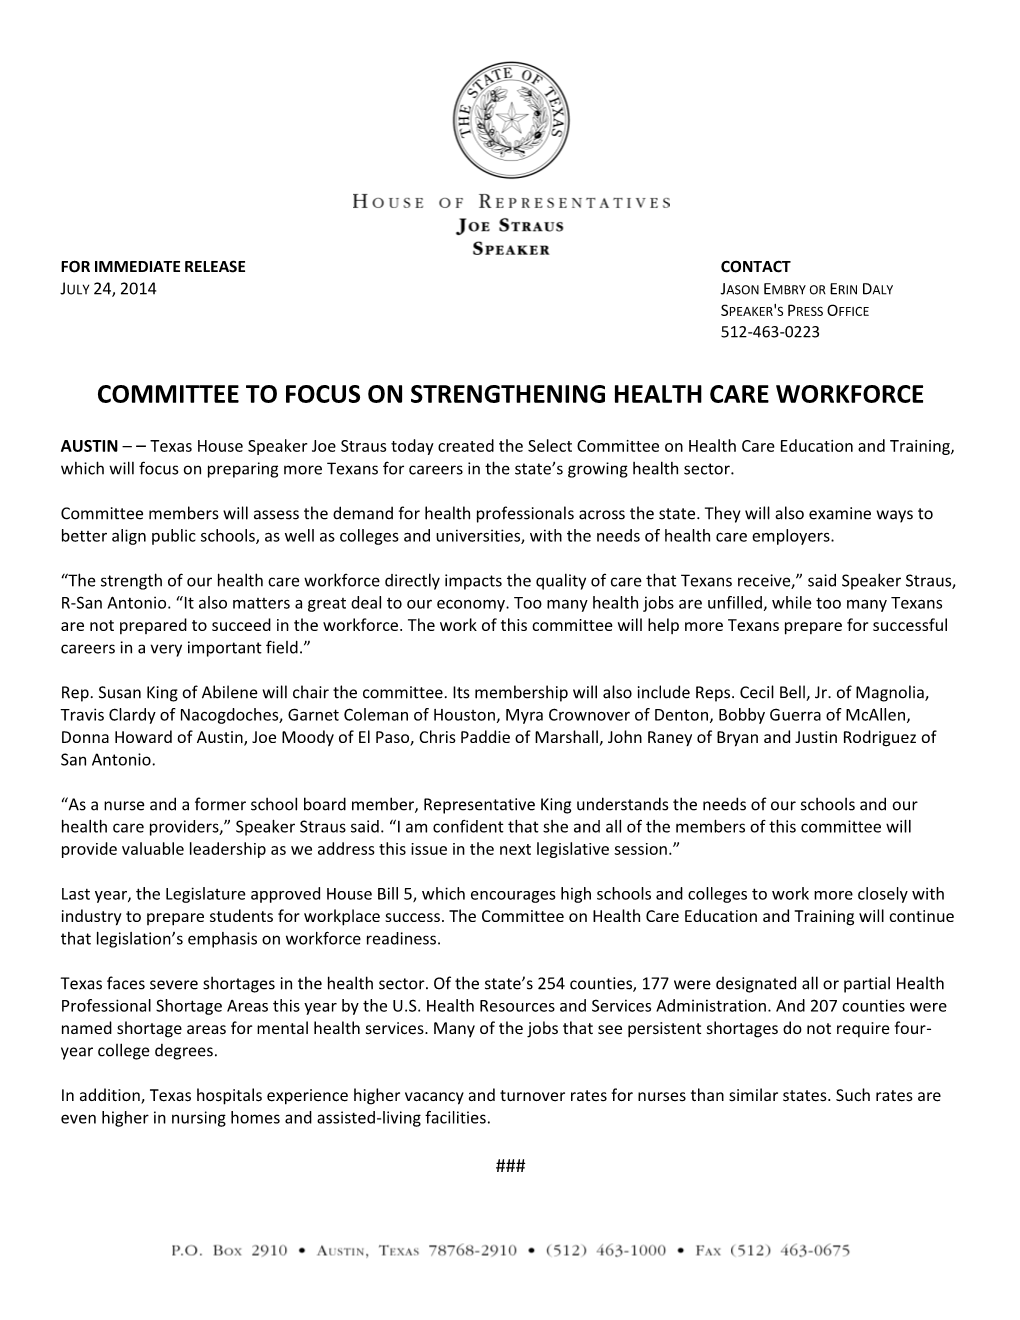 Committee to Focus on Strengthening Health Care Workforce